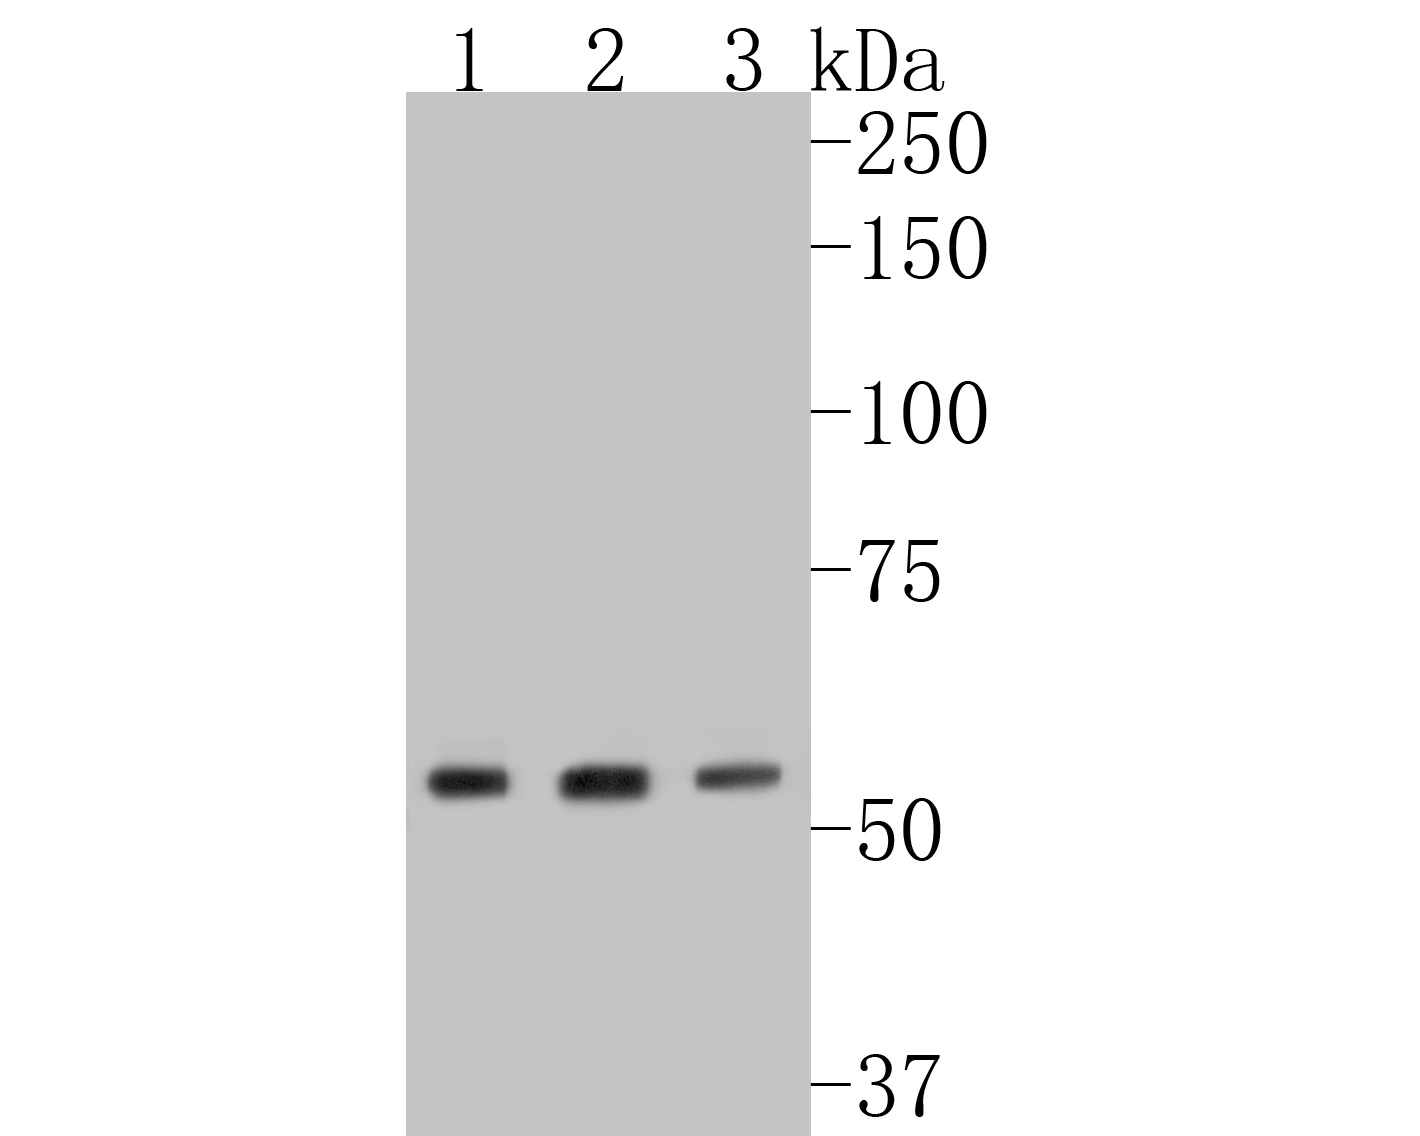 Western blot analysis of LMAN1 on different lysates. Proteins were transferred to a PVDF membrane and blocked with 5% BSA in PBS for 1 hour at room temperature. The primary antibody (ET7110-98, 1/500) was used in 5% BSA at room temperature for 2 hours. Goat Anti-Rabbit IgG - HRP Secondary Antibody (HA1001) at 1:5,000 dilution was used for 1 hour at room temperature.<br />
Positive control: <br />
Lane 1: NIH/3T3 cell lysate<br />
Lane 2: Human placenta tissue lysate<br />
Lane 3: HUVEC cell lysate